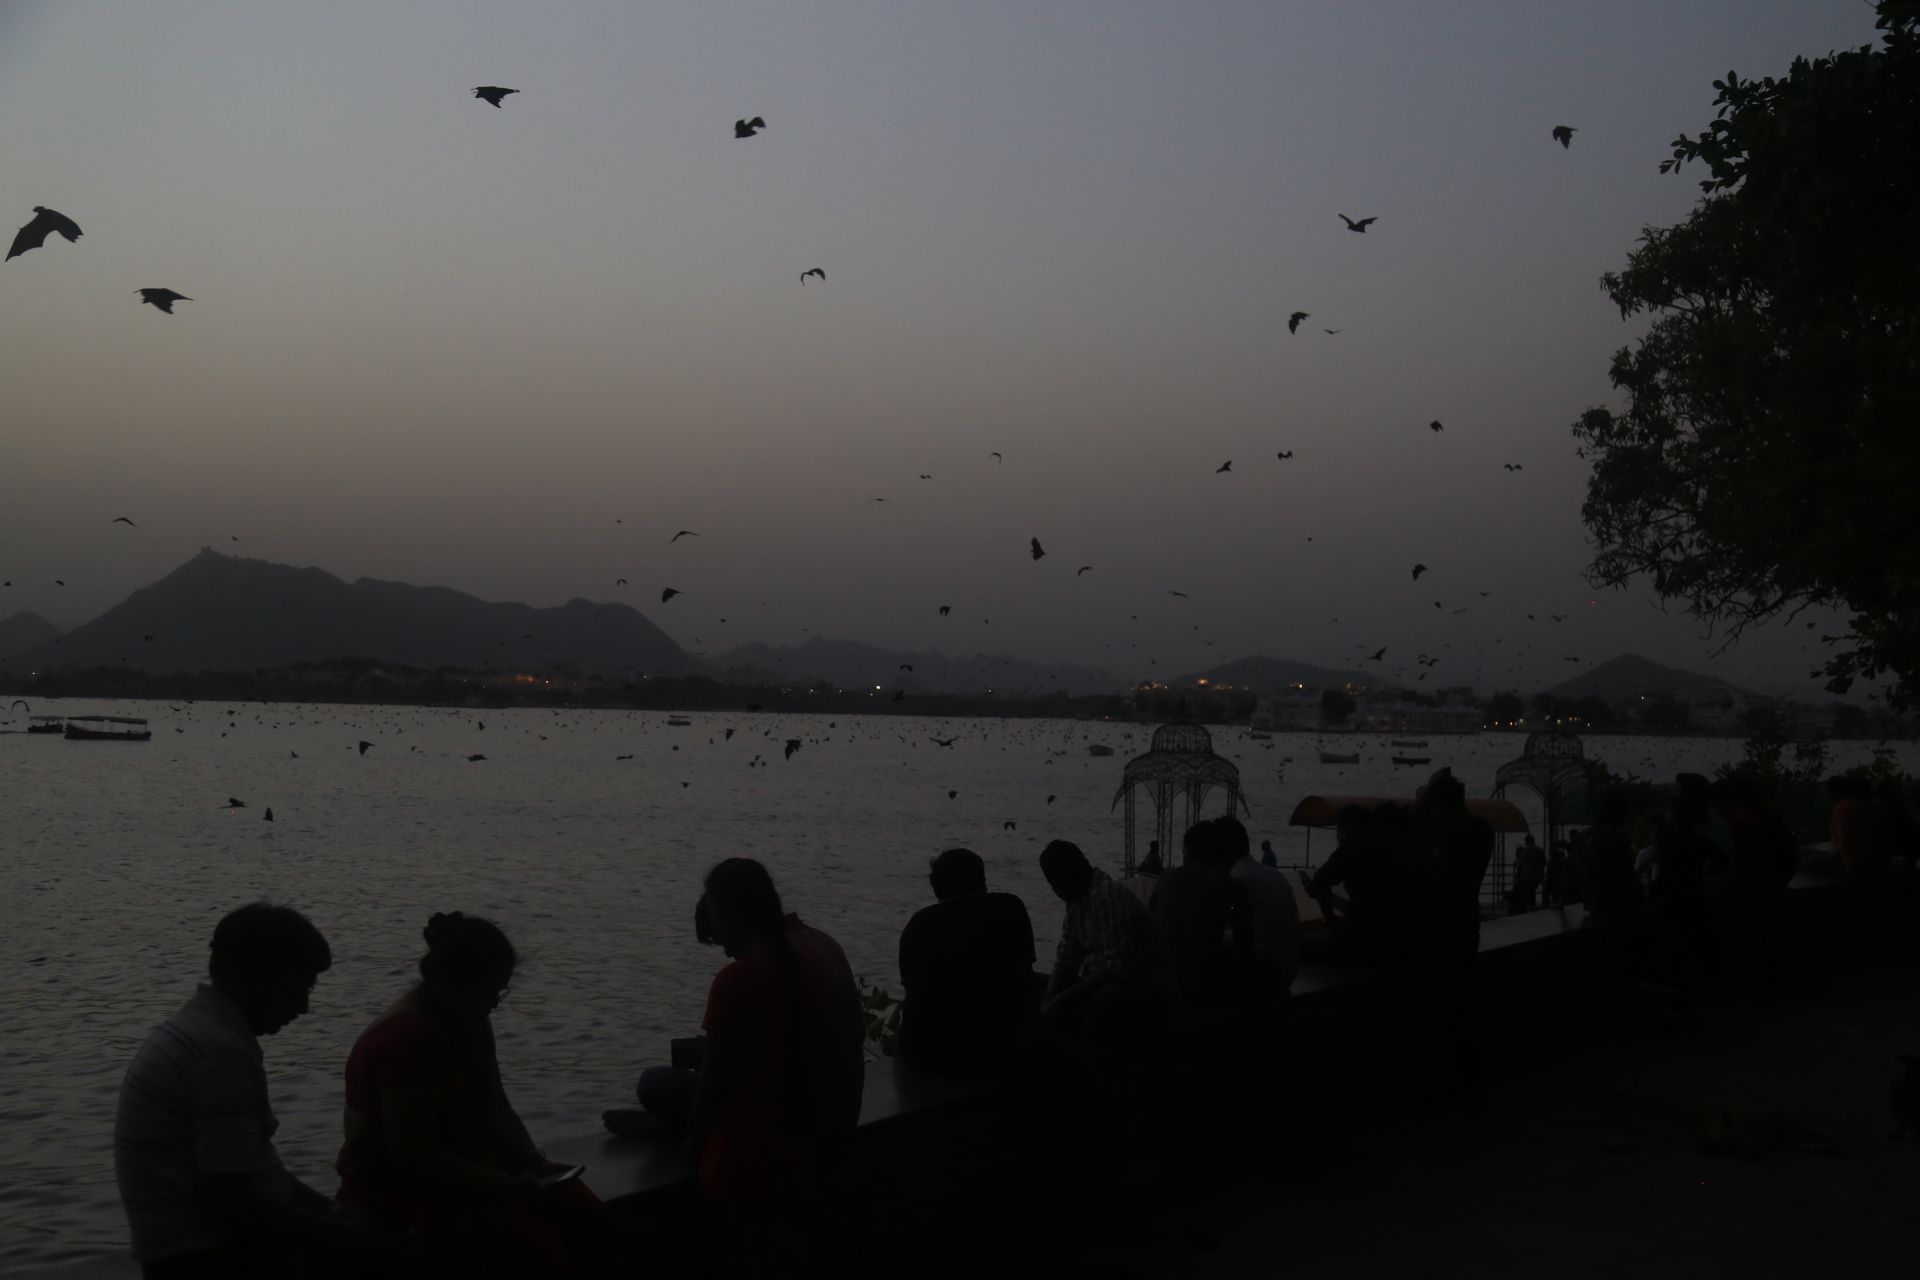 Dangers from the abundance of bats in udaipur